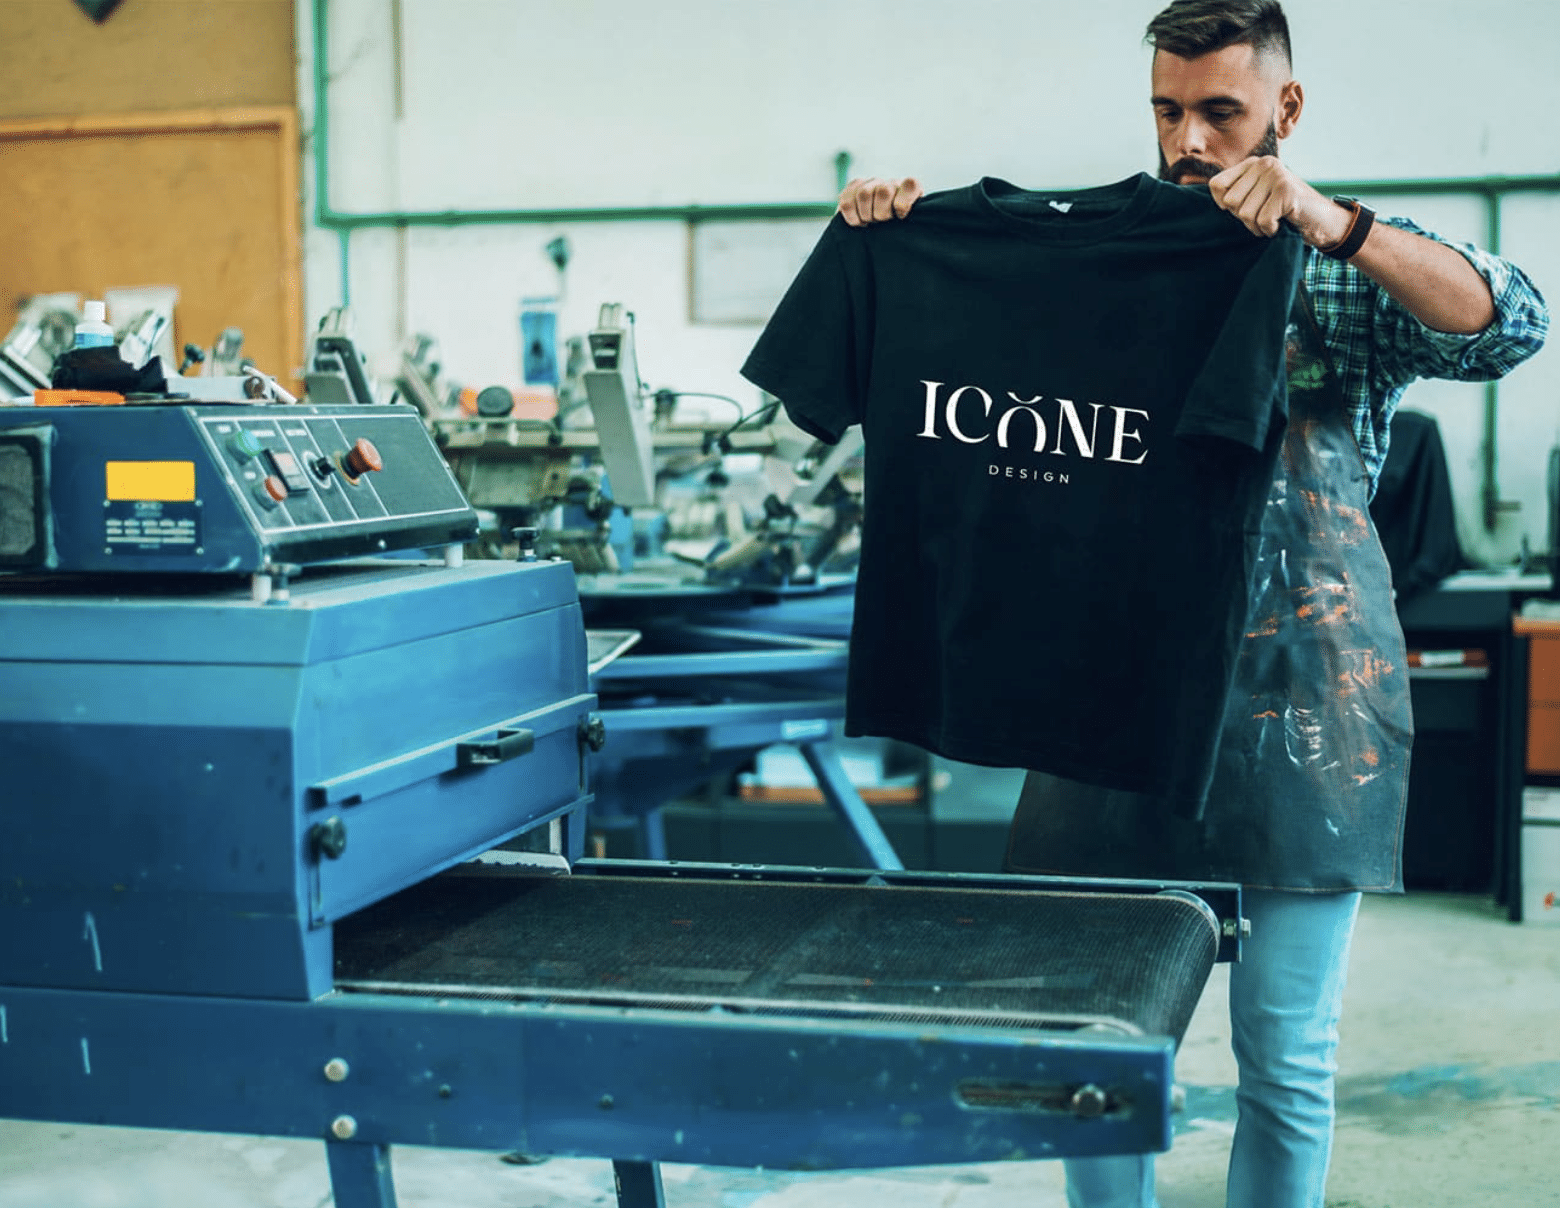 Made in France - Icone design